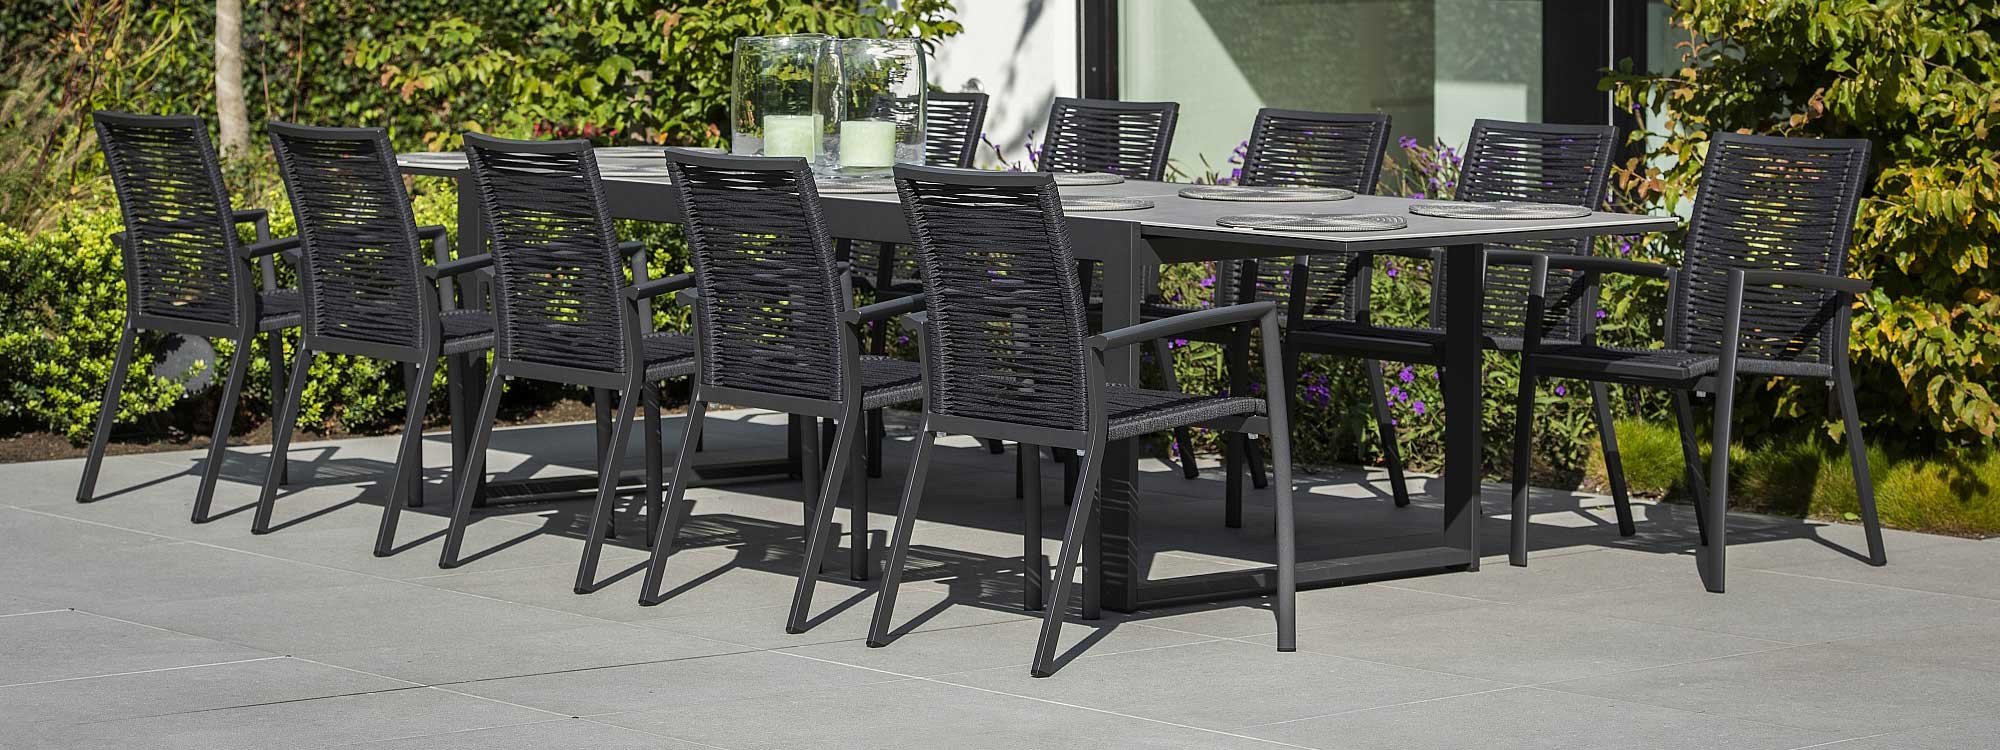 Image of black Vigo XL extending garden table with cement grey ceramic table top, together with 10 Sevilla garden chairs by Jati & Kebon